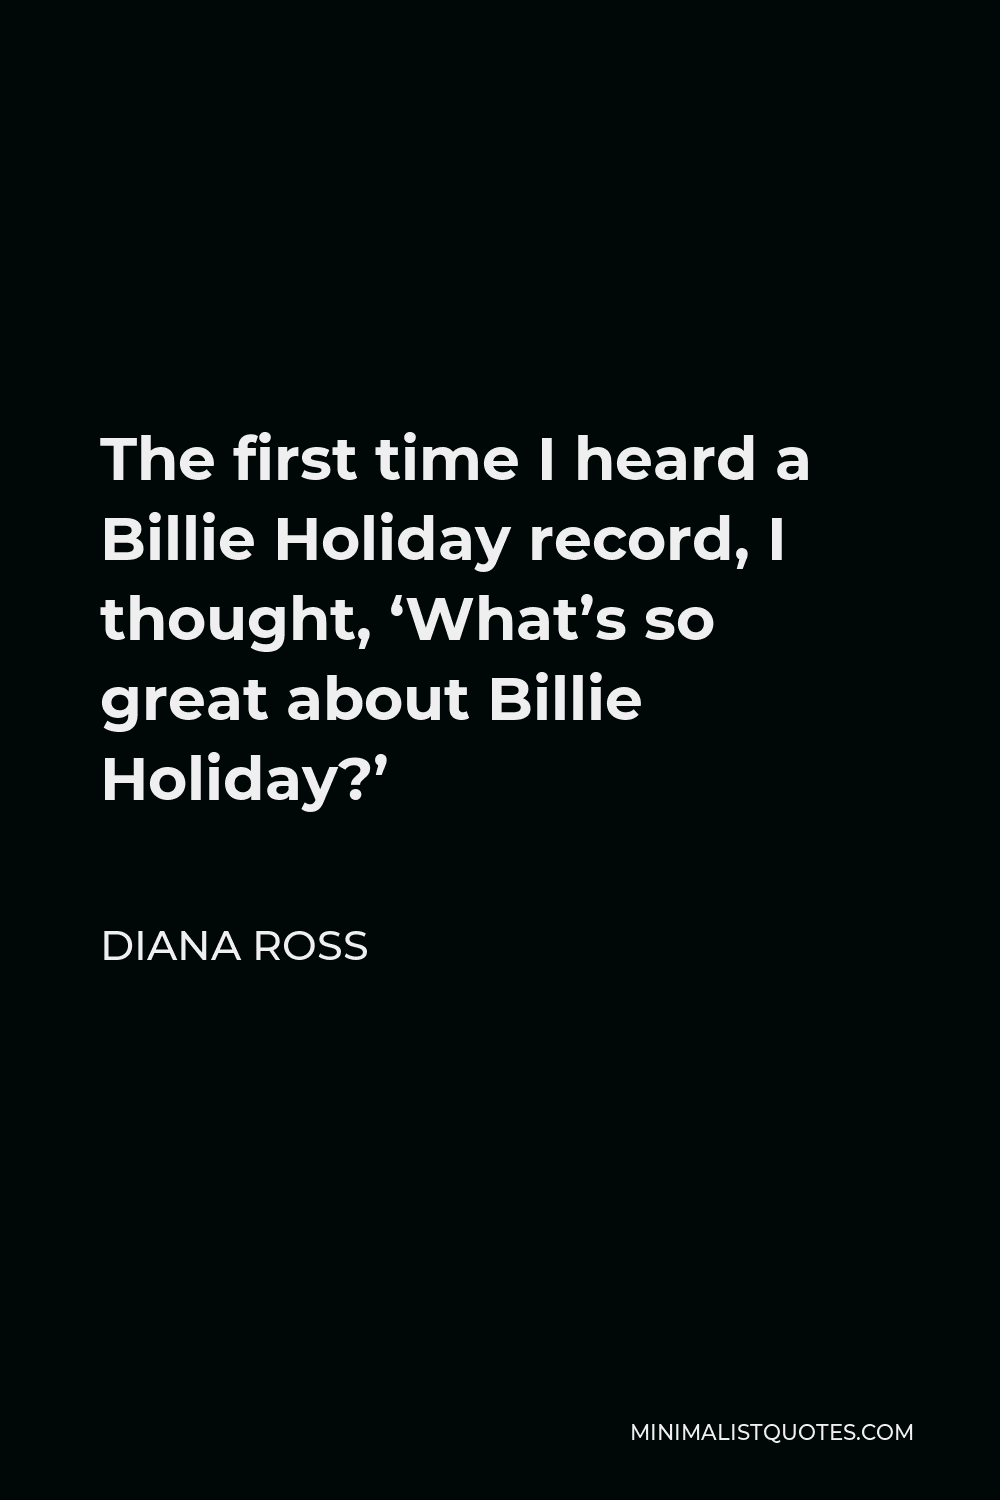 Diana Ross Quote - The first time I heard a Billie Holiday record, I thought, ‘What’s so great about Billie Holiday?’